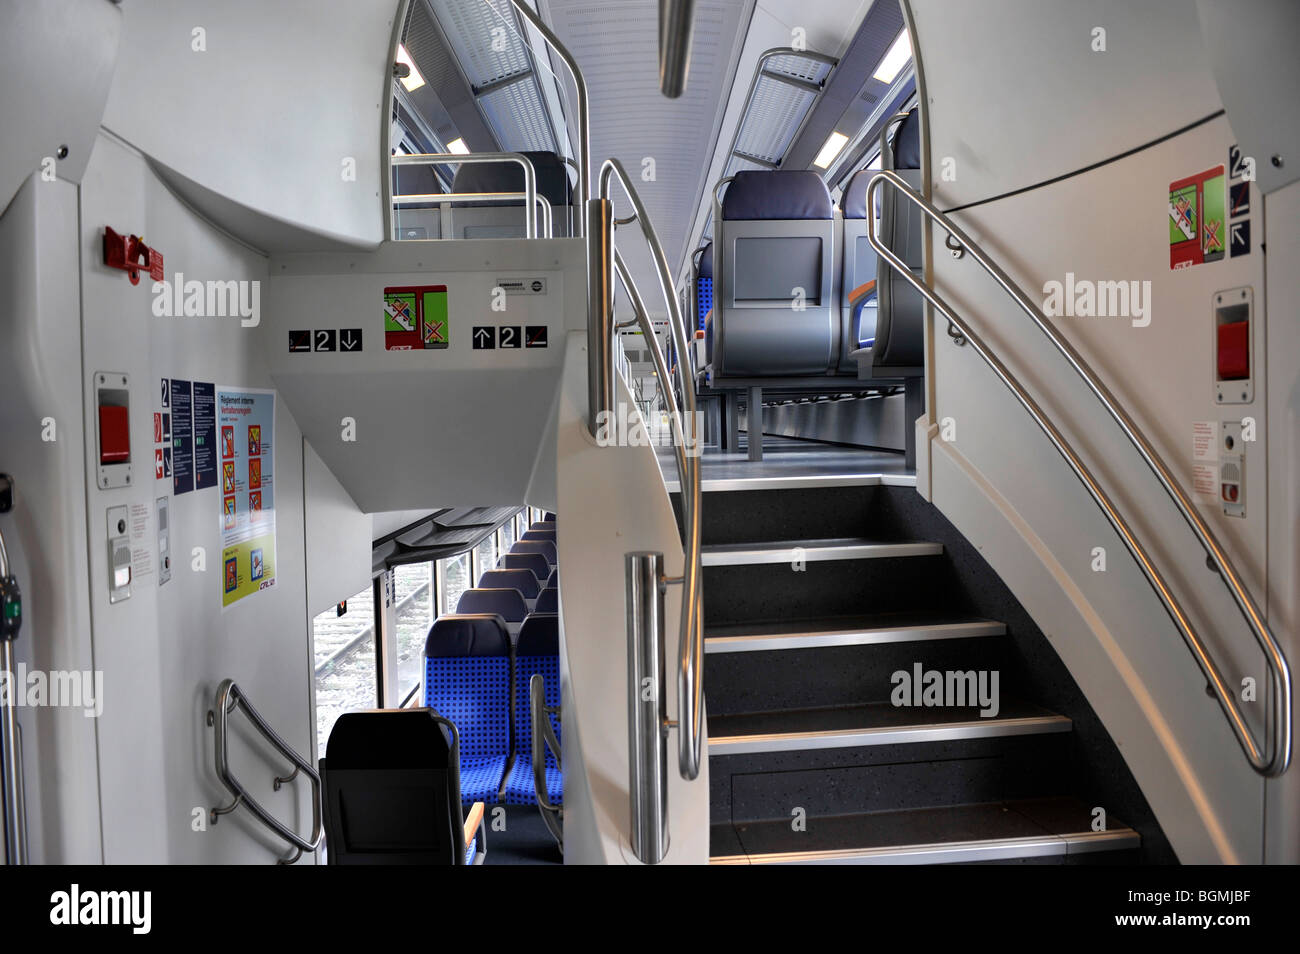 Interior of double deck train carriage, Luxembourg Railways, Luxemburgh Stock Photo